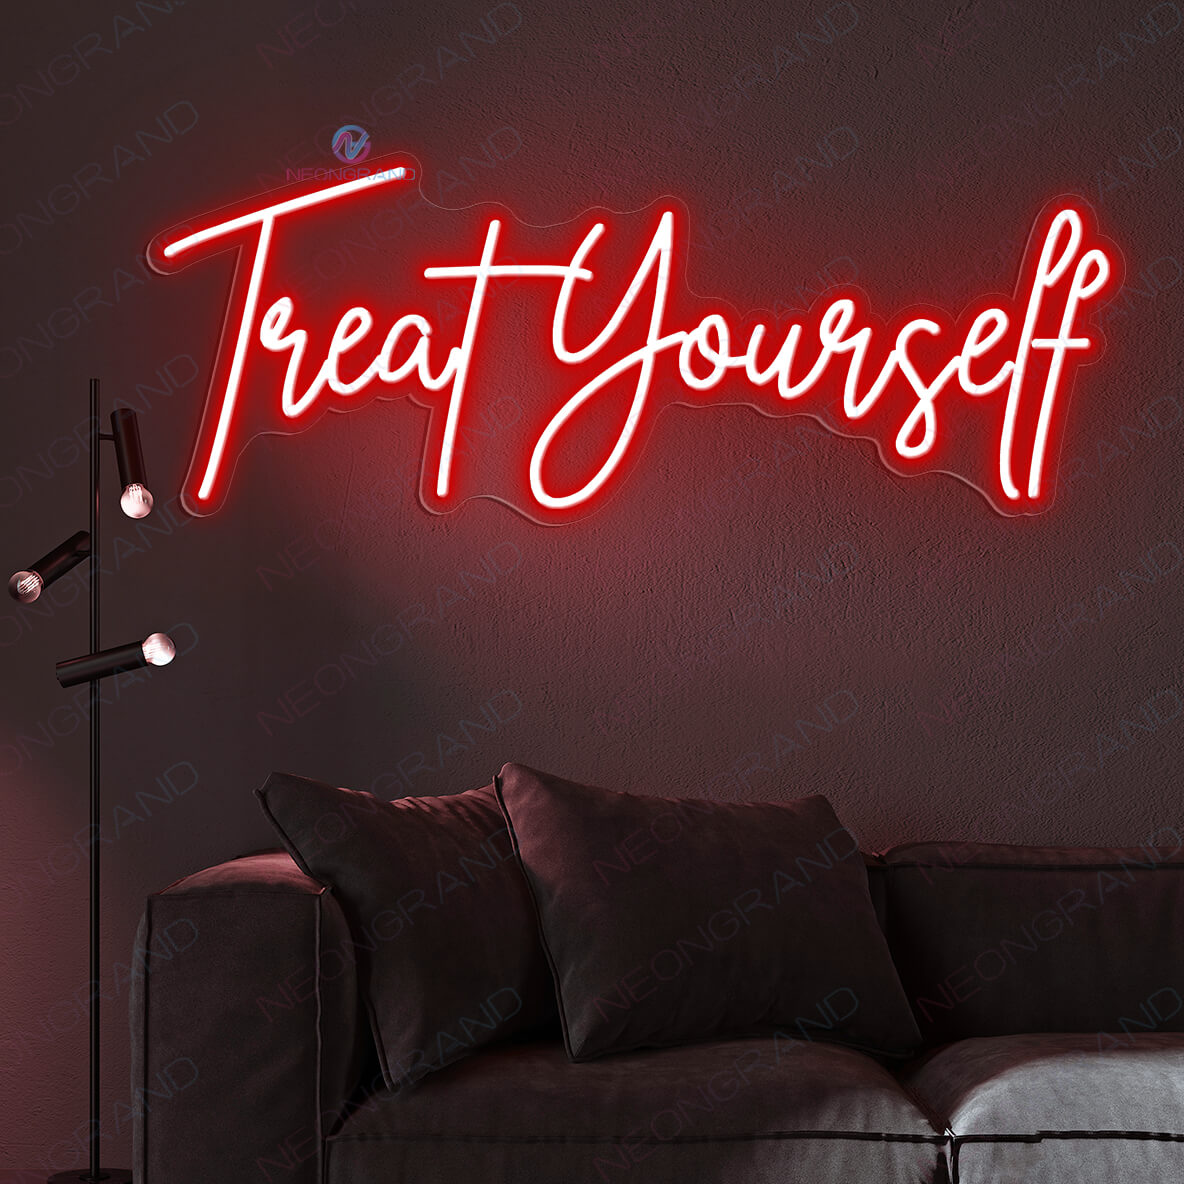 Treat Yourself Neon Sign Motivation Led Light red